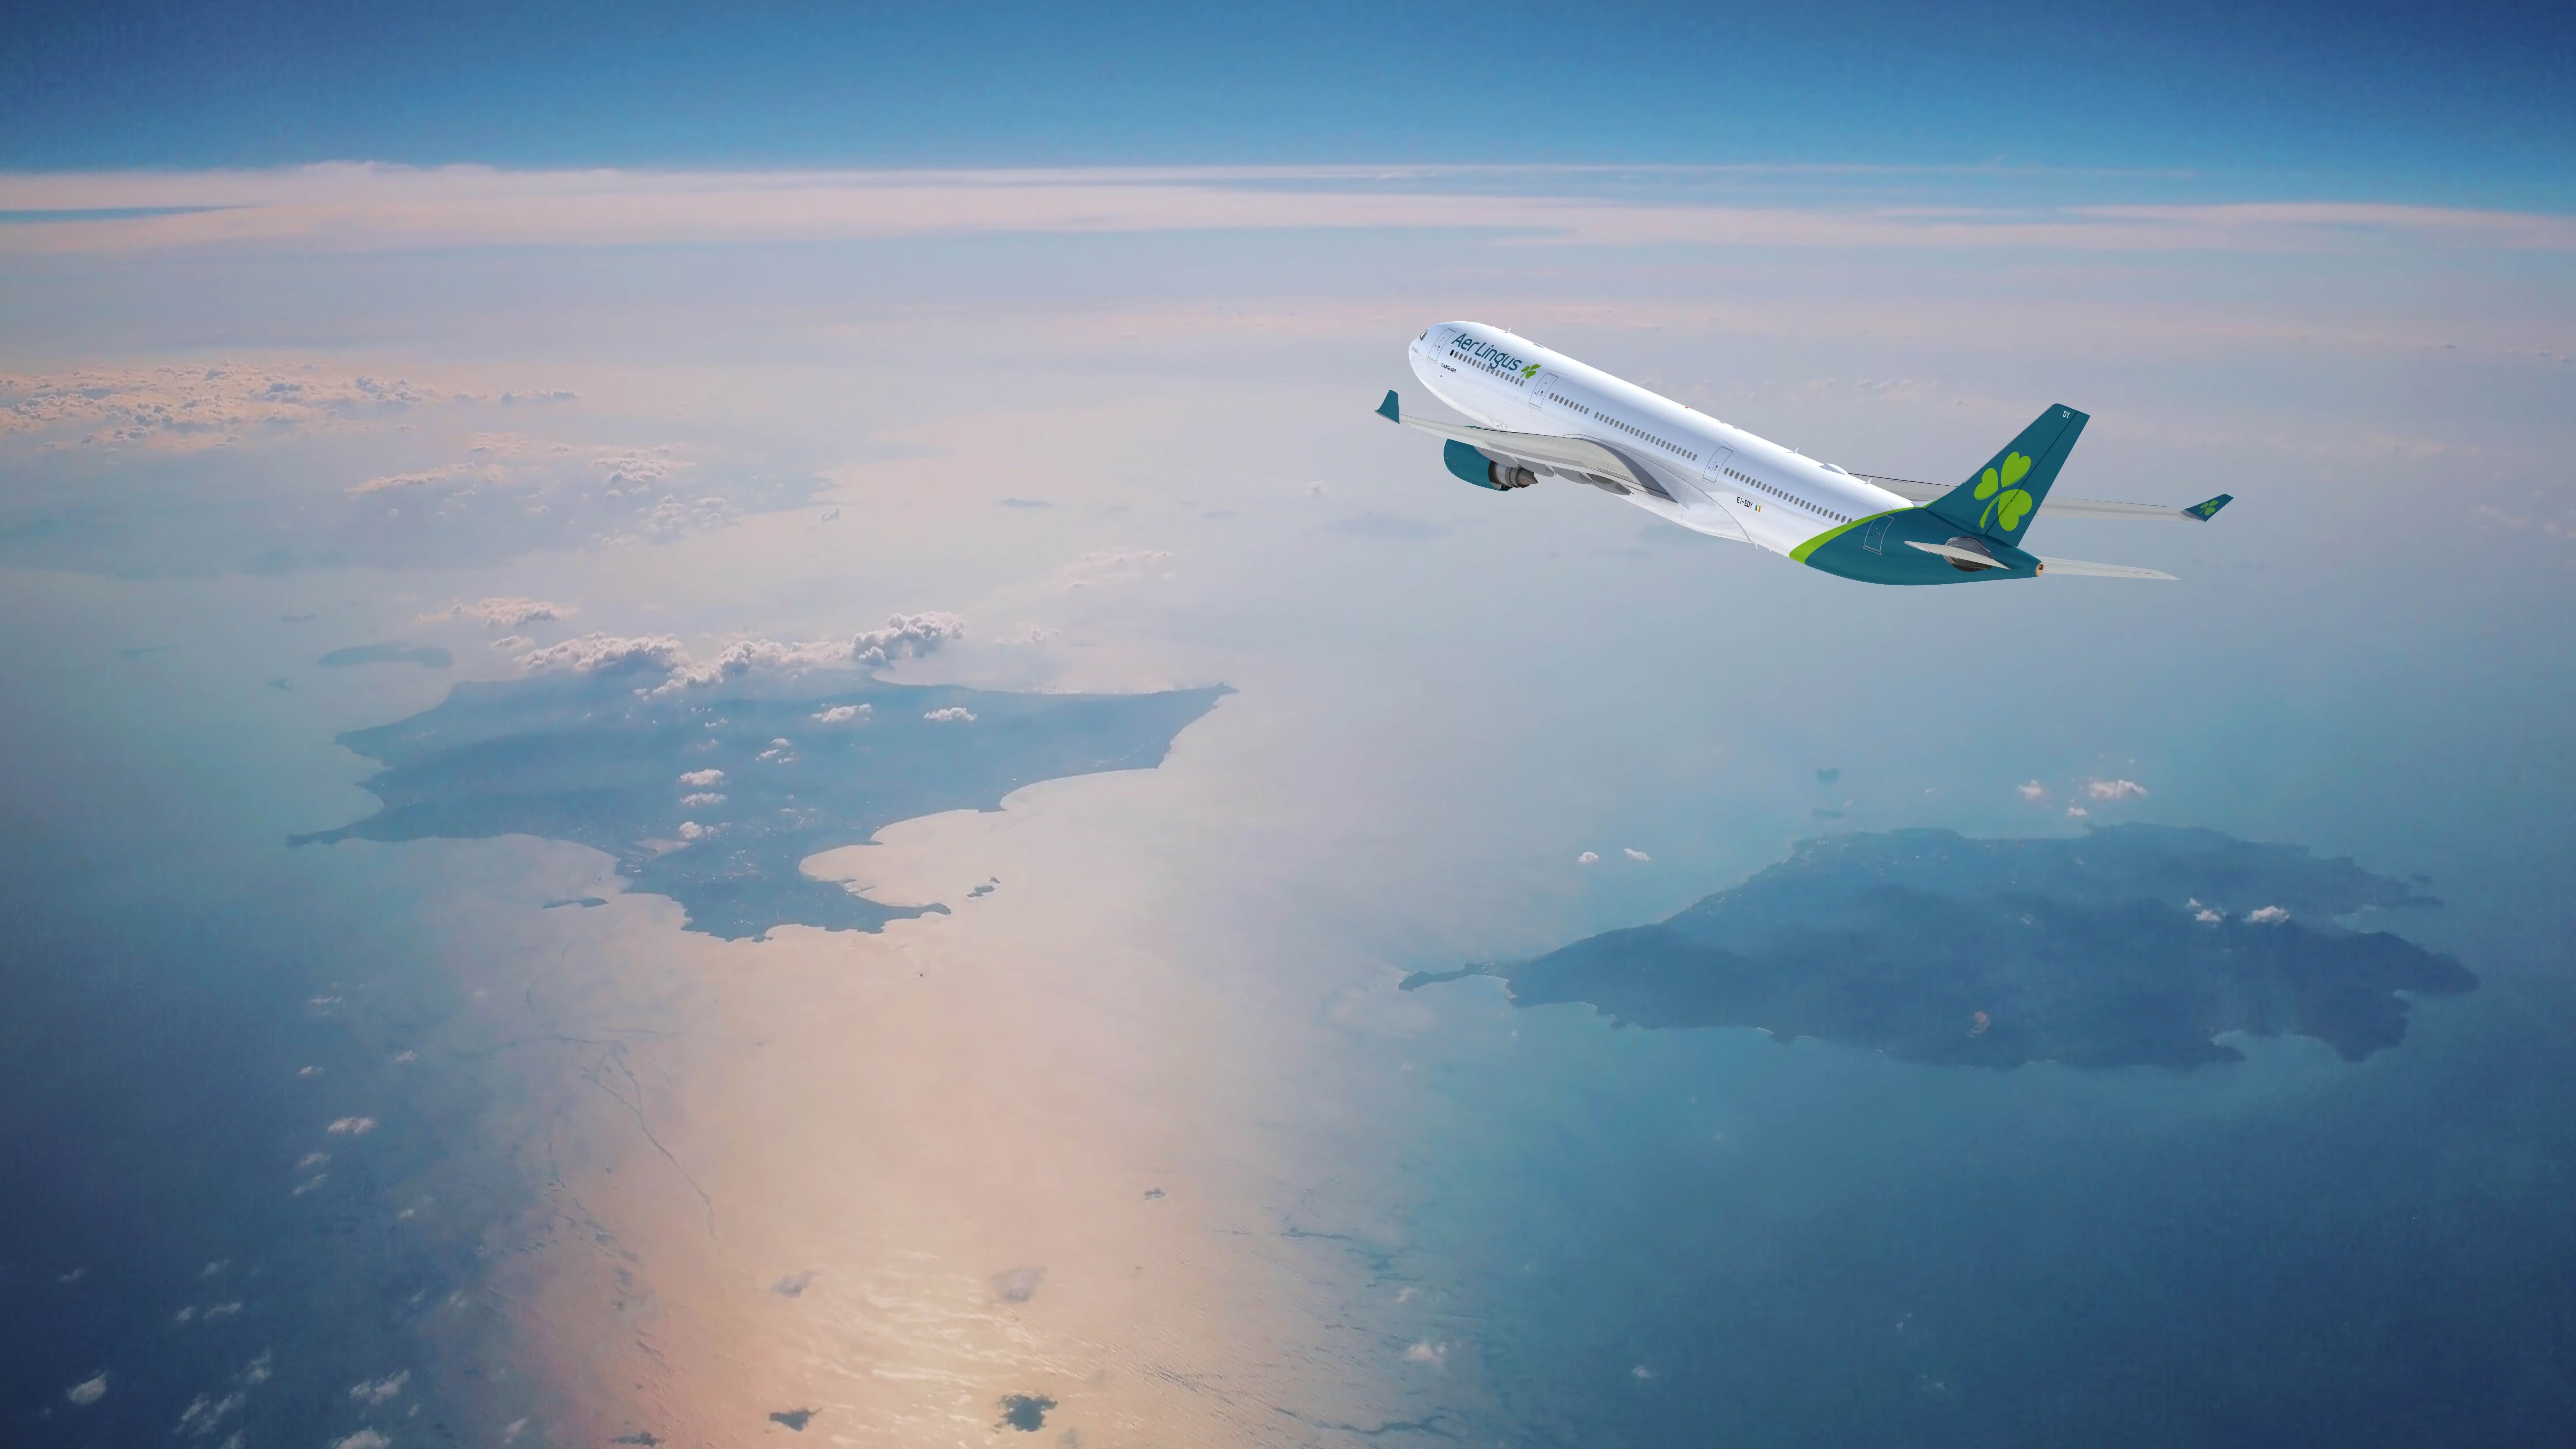 169an-aer-lingus-a330-300-flying-above-the-ocean